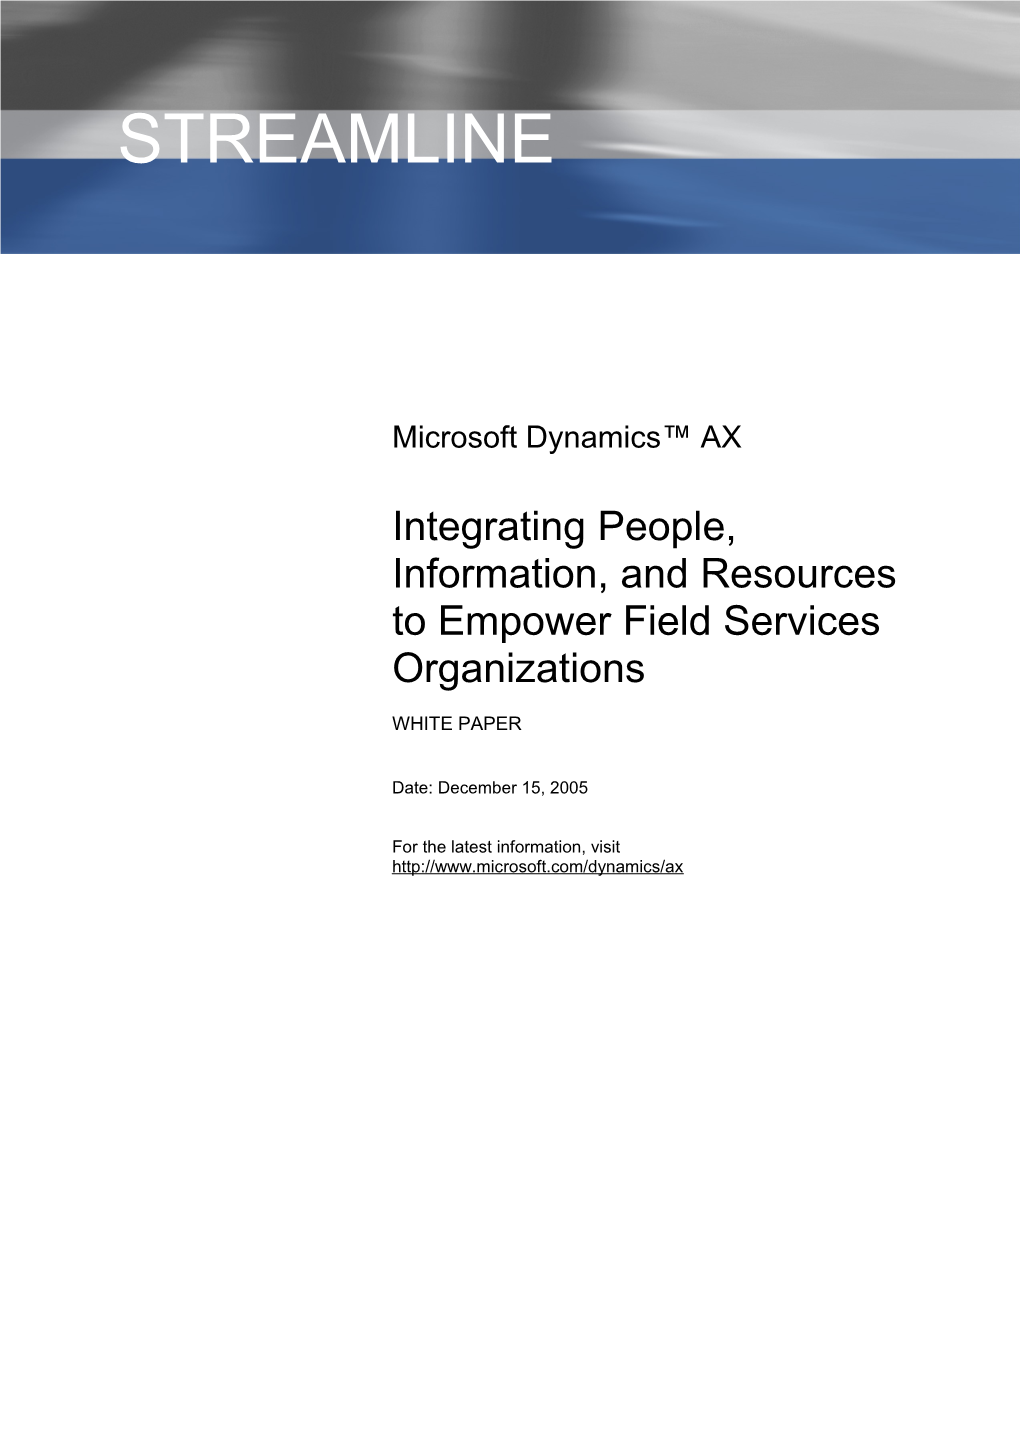 Integrating People, Information, and Resources to Empower Field Services Organizations